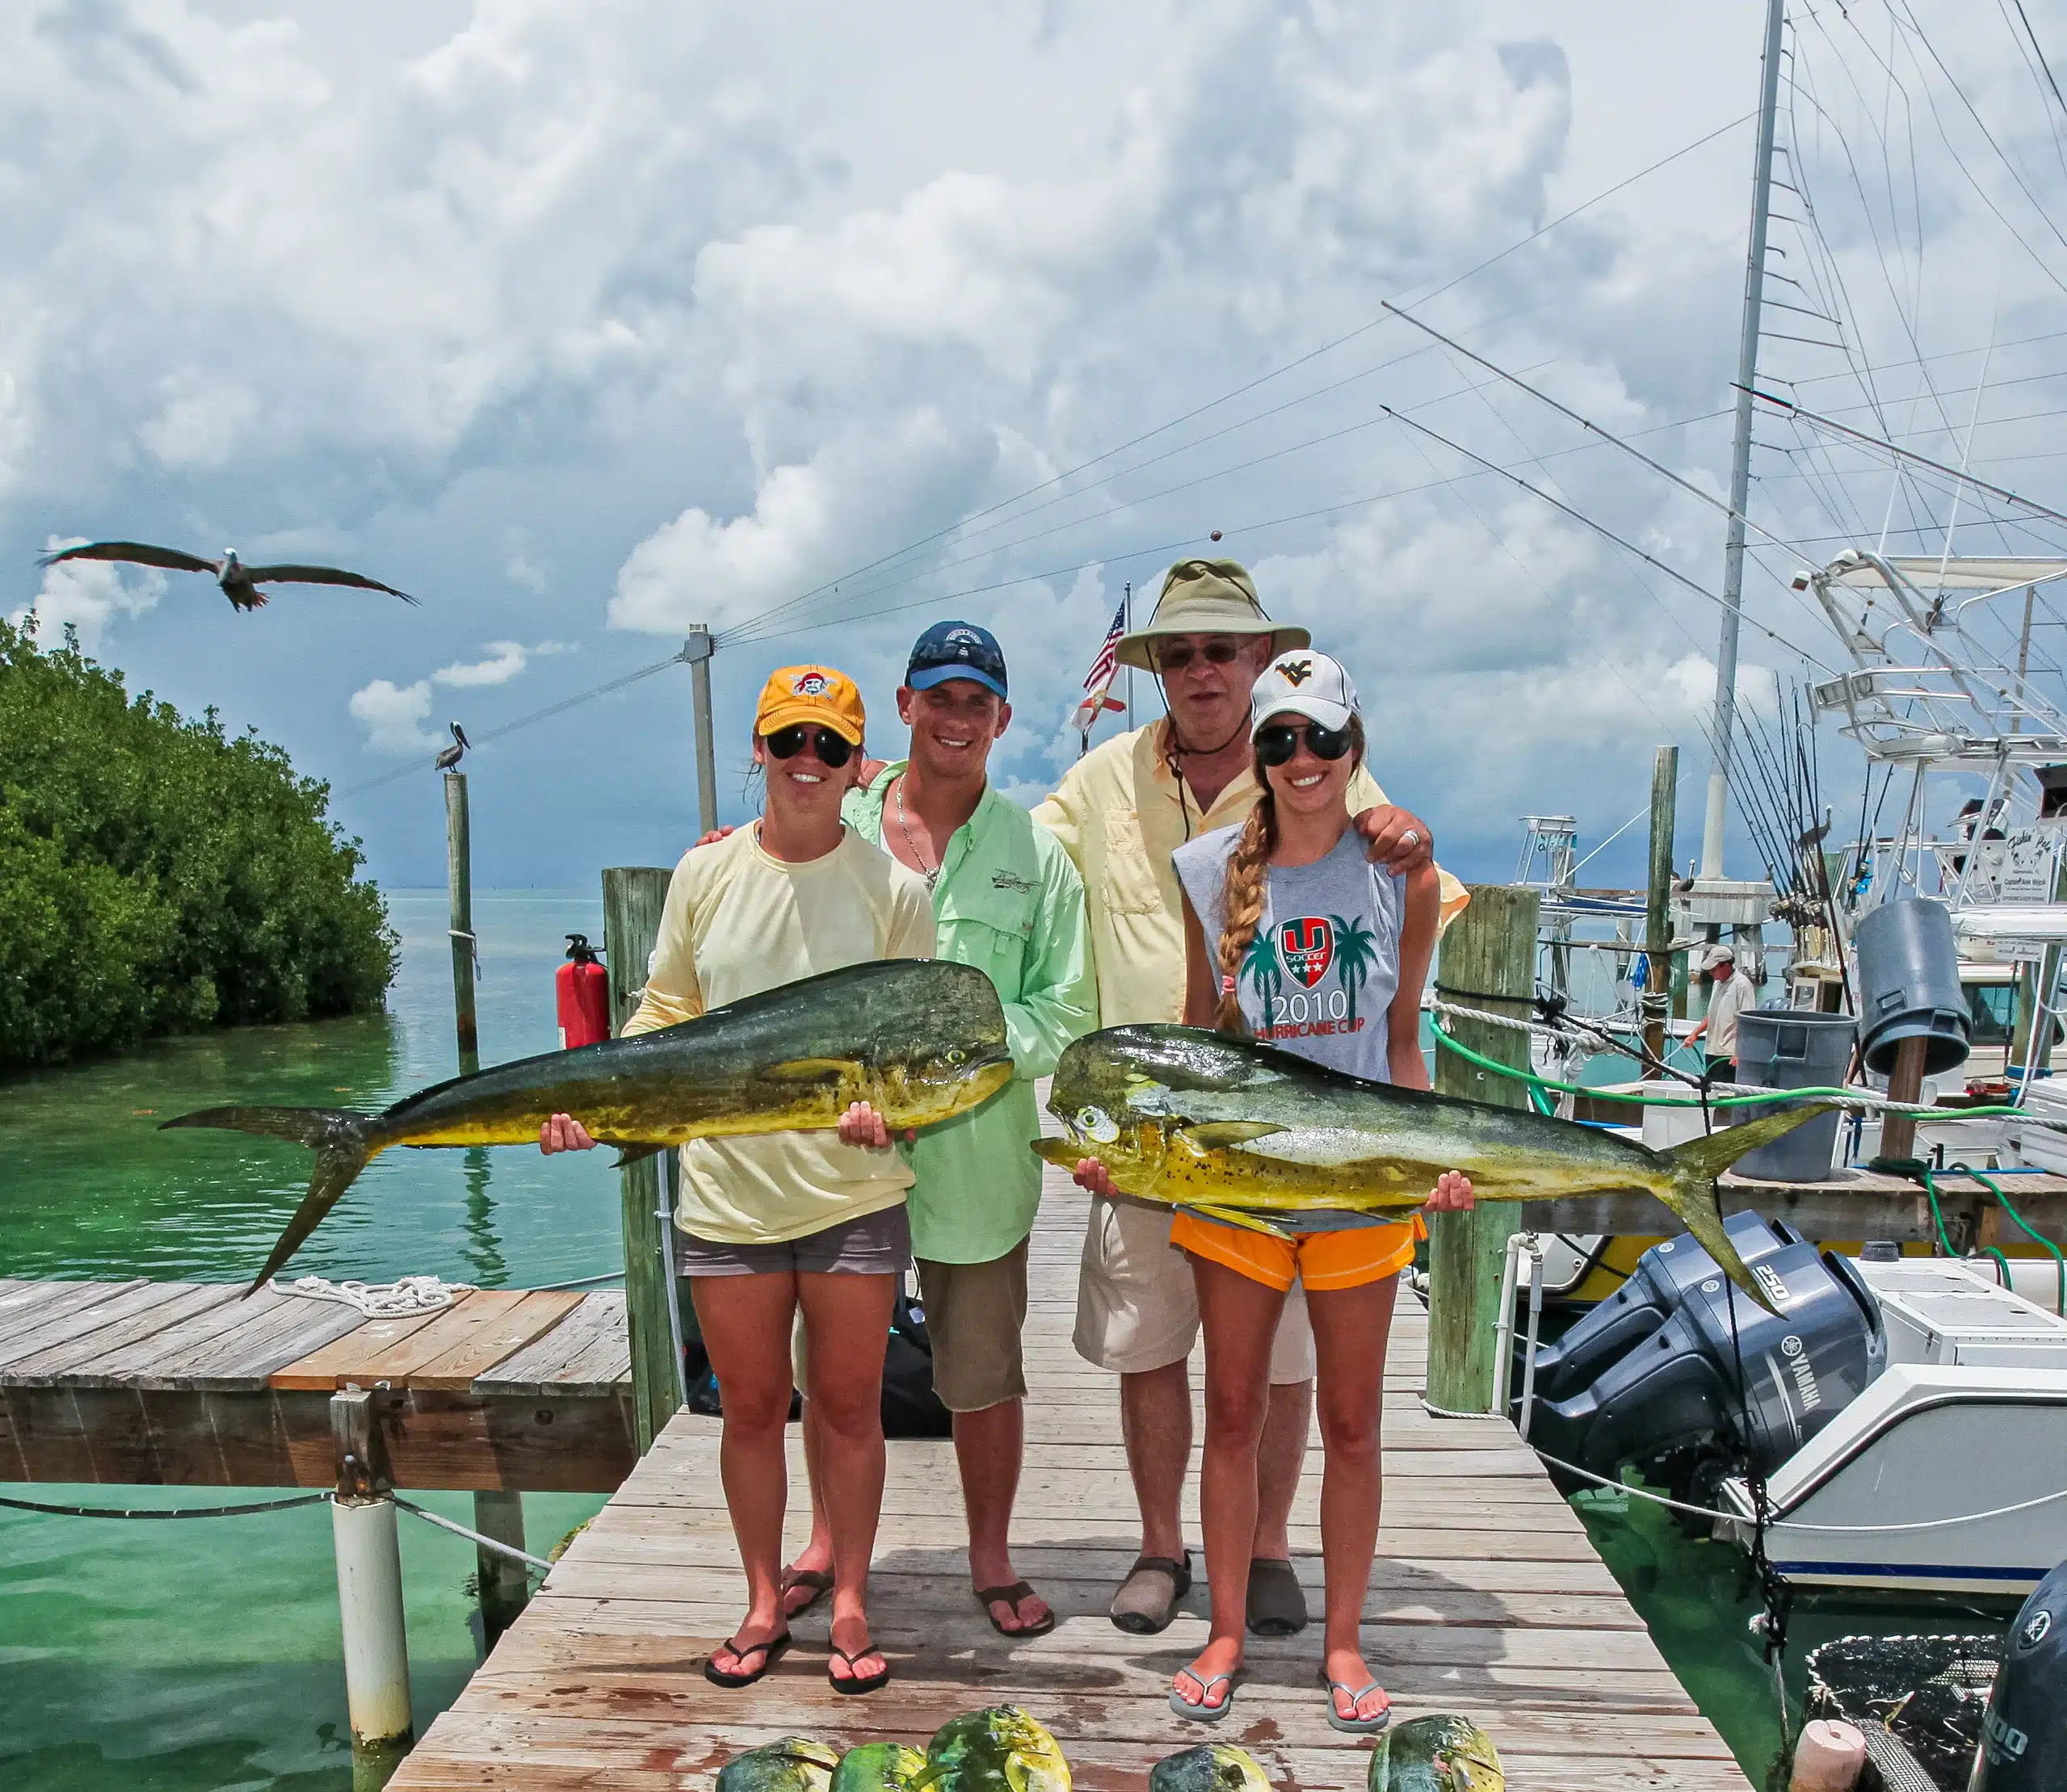 BOOK A PRIVATE FISHING TRIP IN THE FLORIDA KEYS NOW!